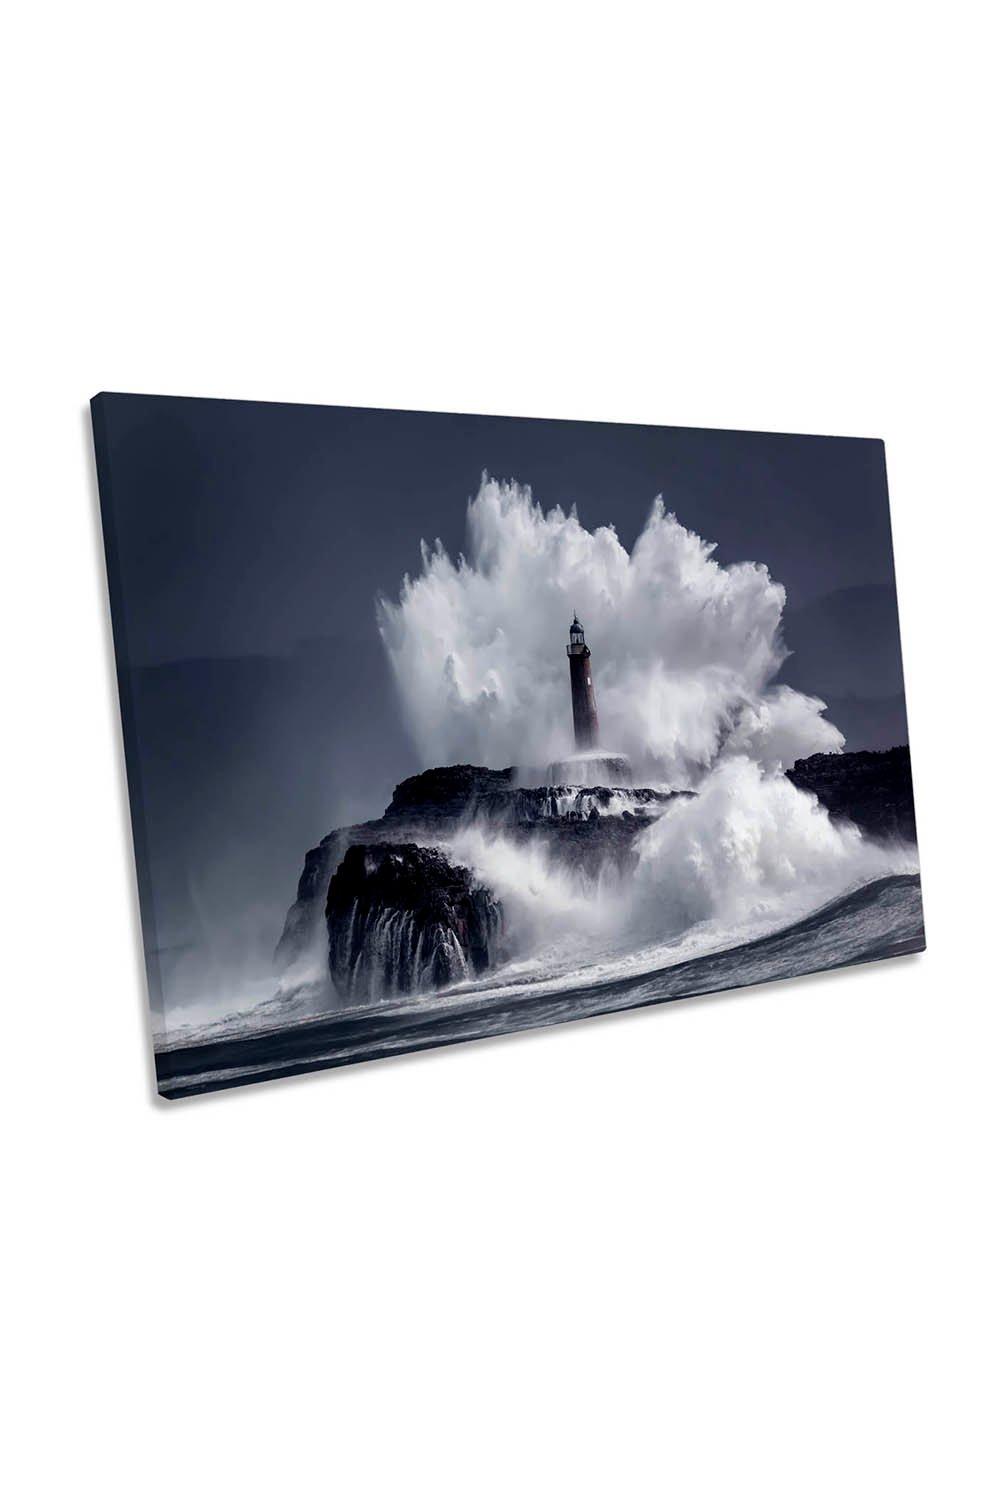 Lighthouse Seascape Crashing Wave Canvas Wall Art Picture Print